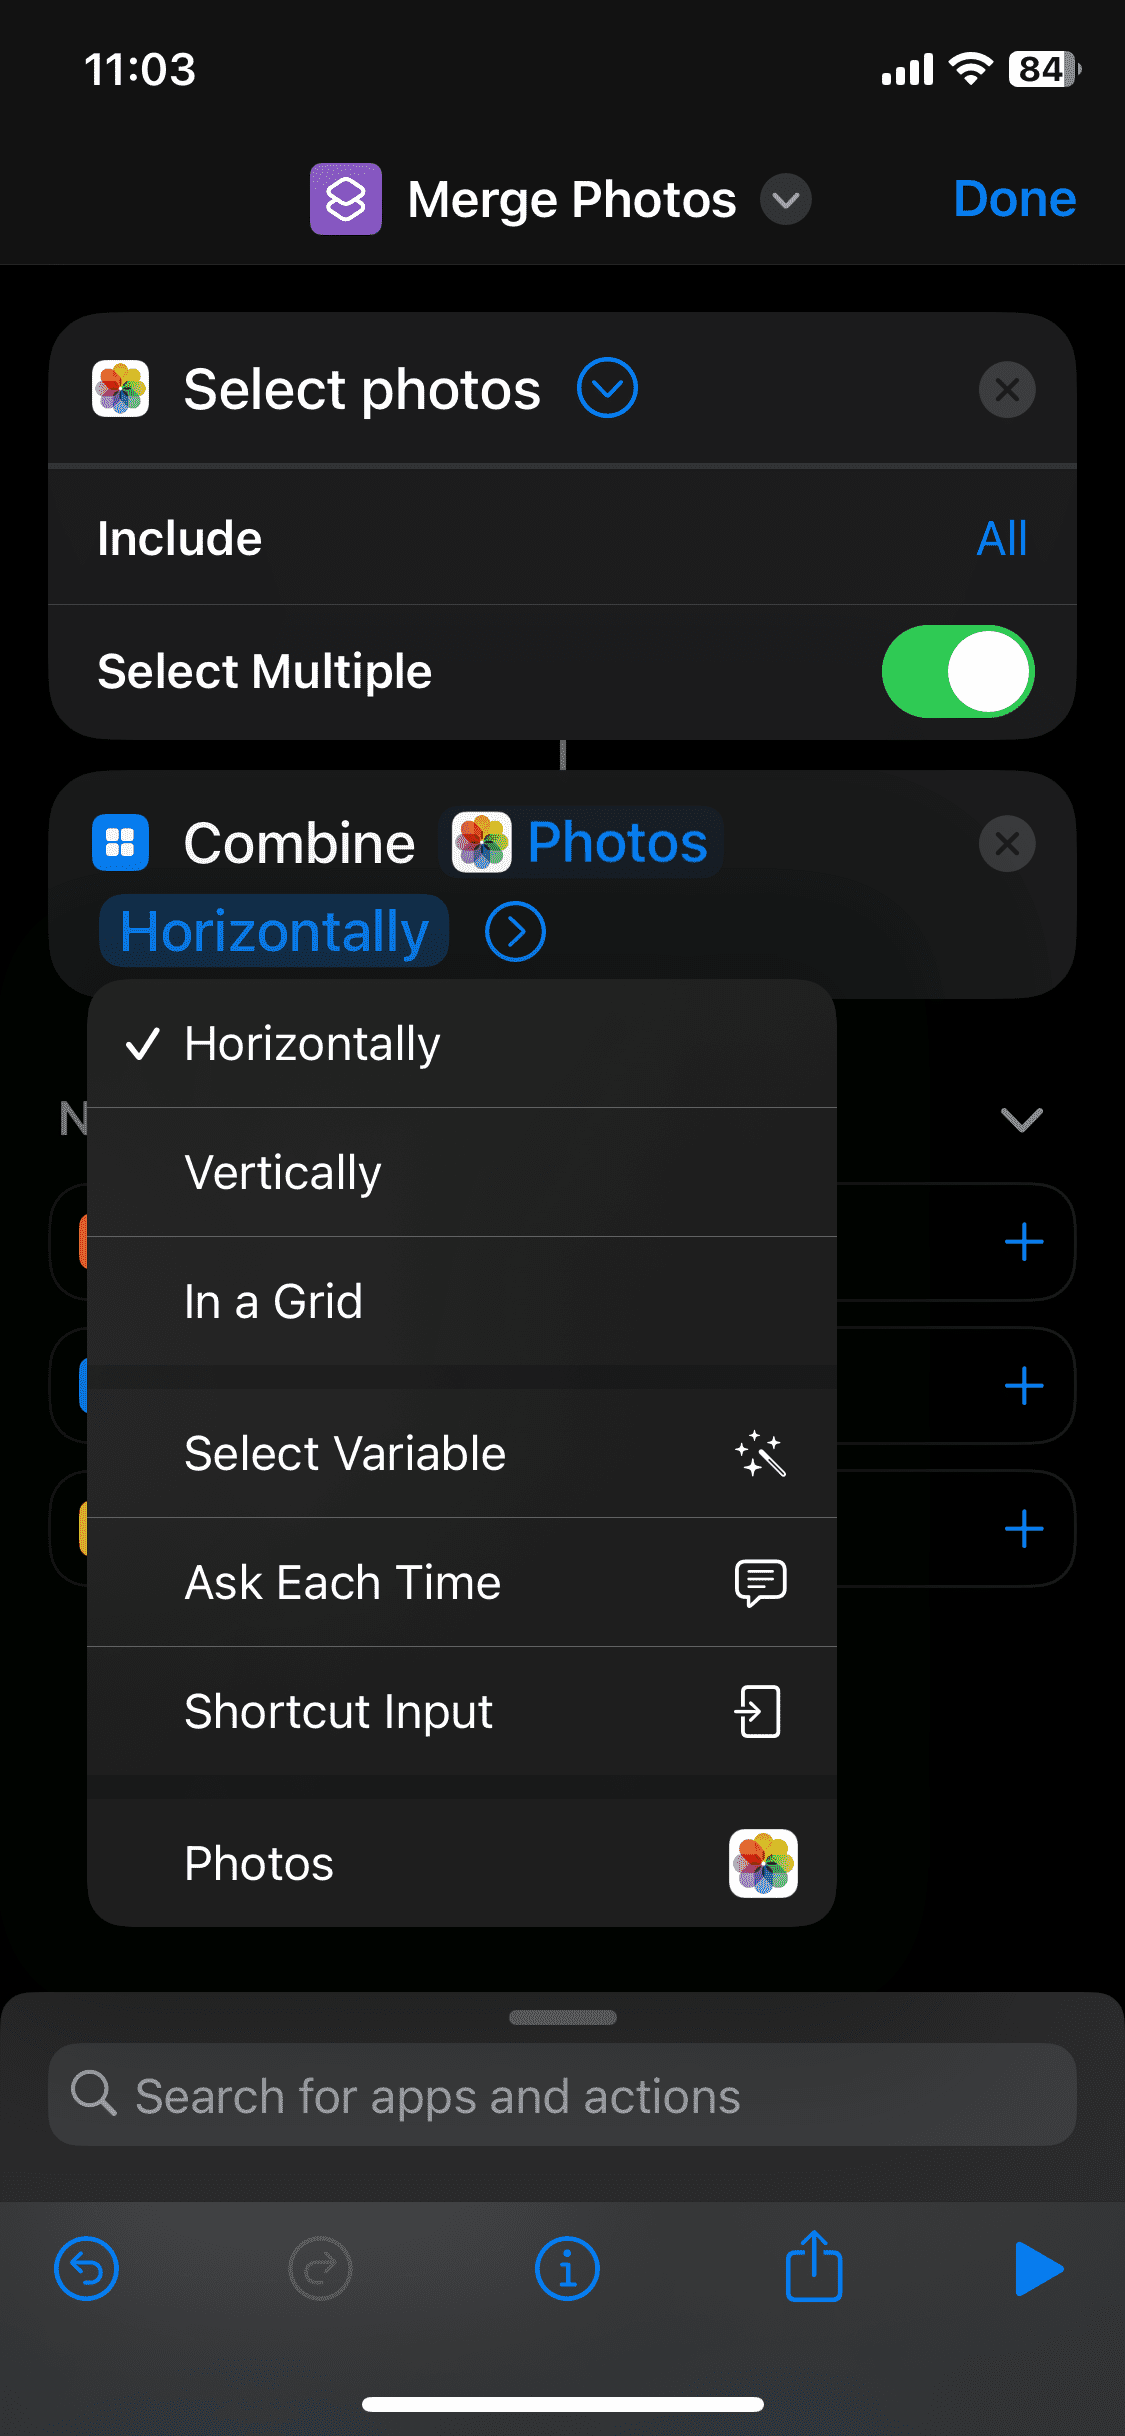 How to change combine photos options on iPhone